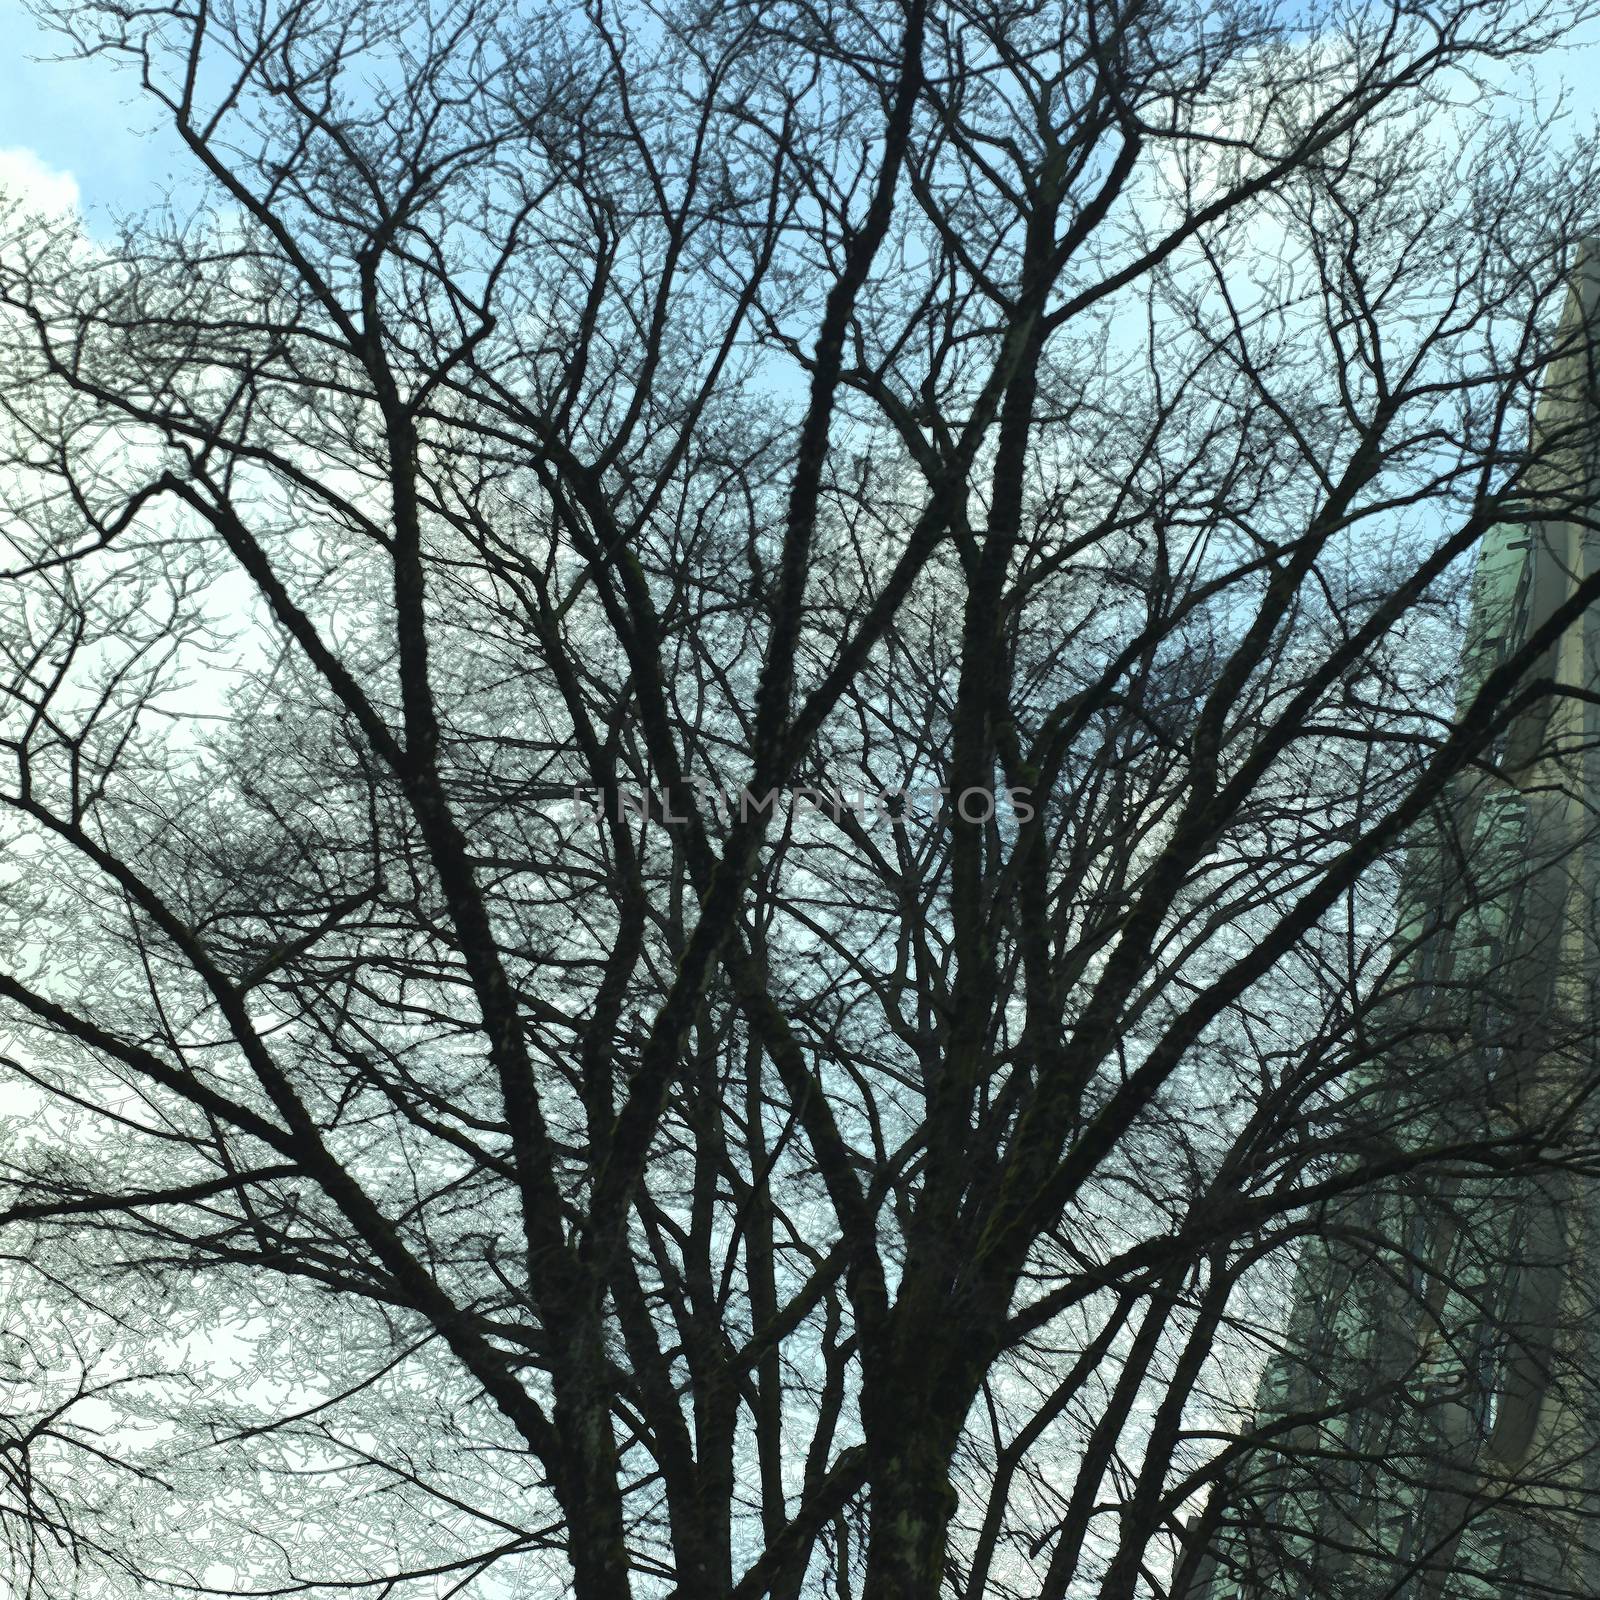 Bare branches of a leafless tree against a misty blue sky in an urban setting